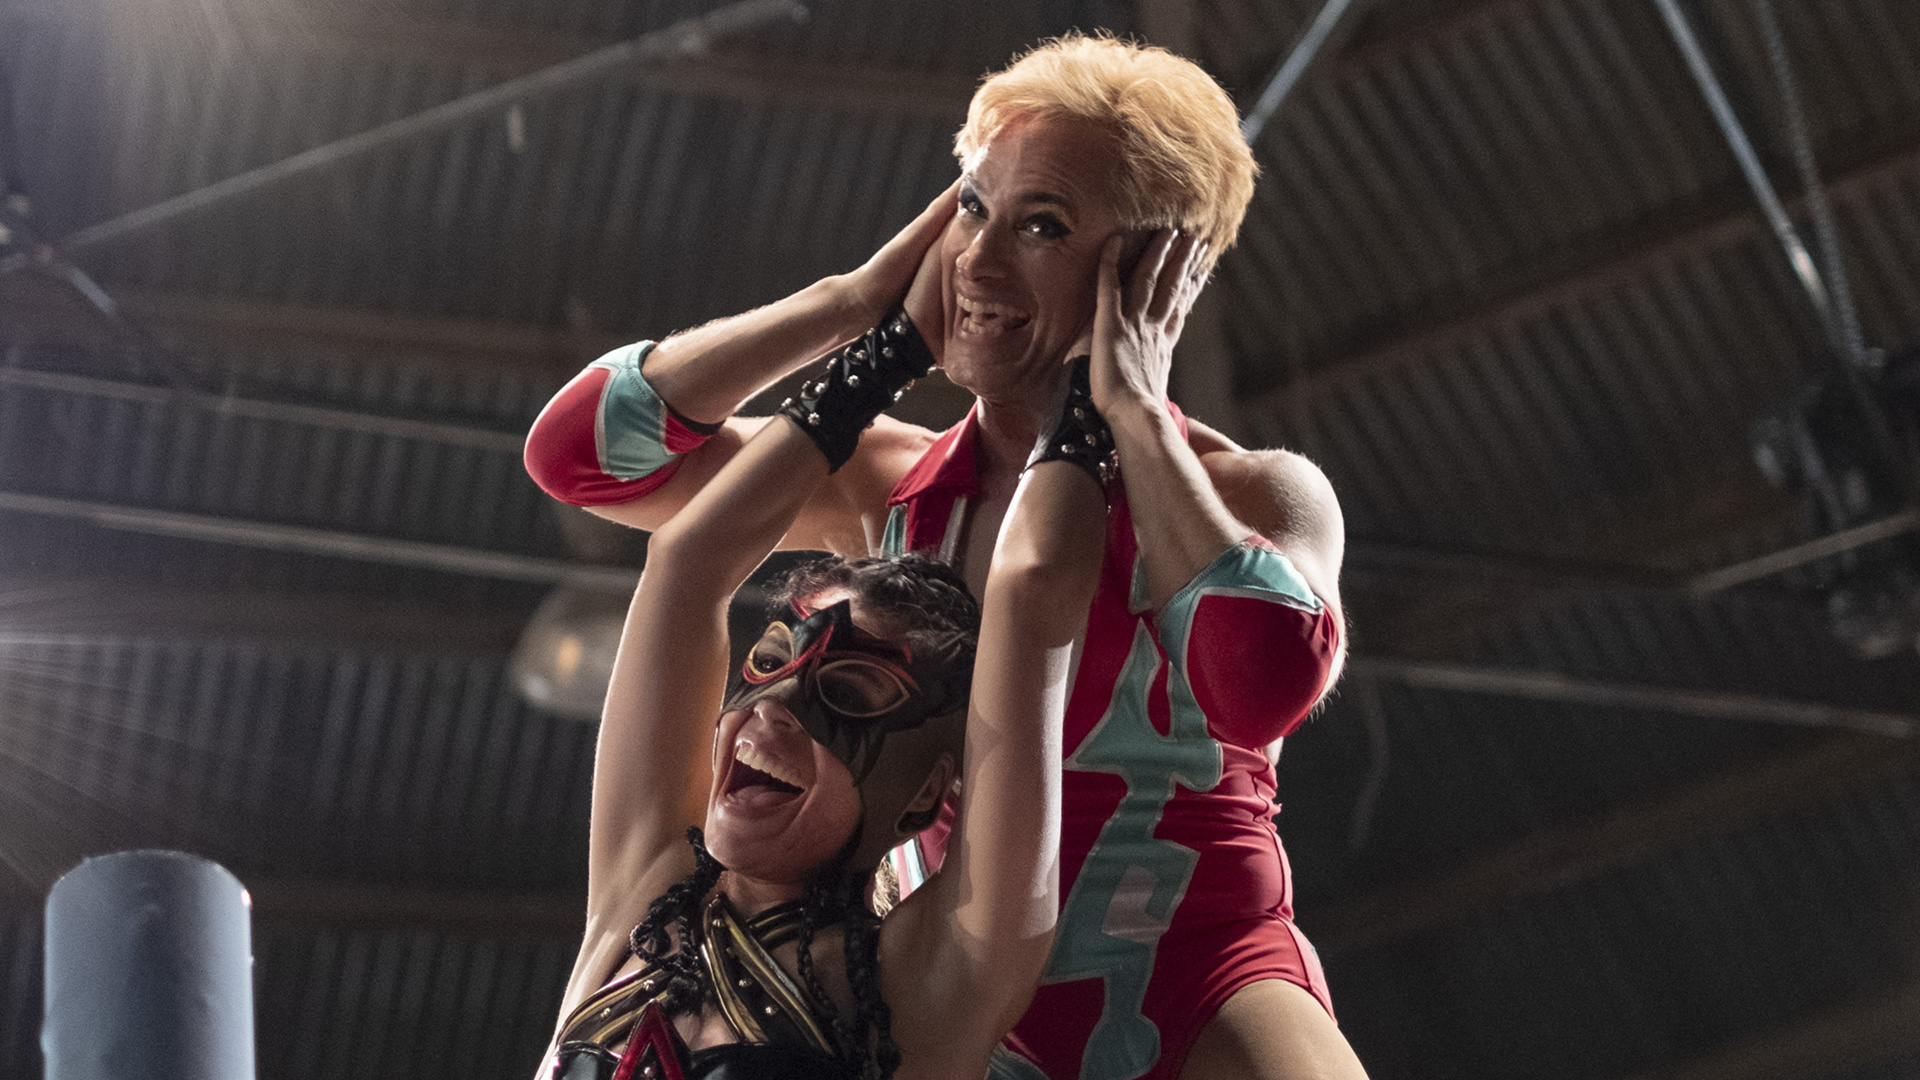 Saúl Armendáriz, a homosexual amateur wrestler from Texas, becomes a star when he creates the character Cassandro, the `Liberace of Lucha Libre.'